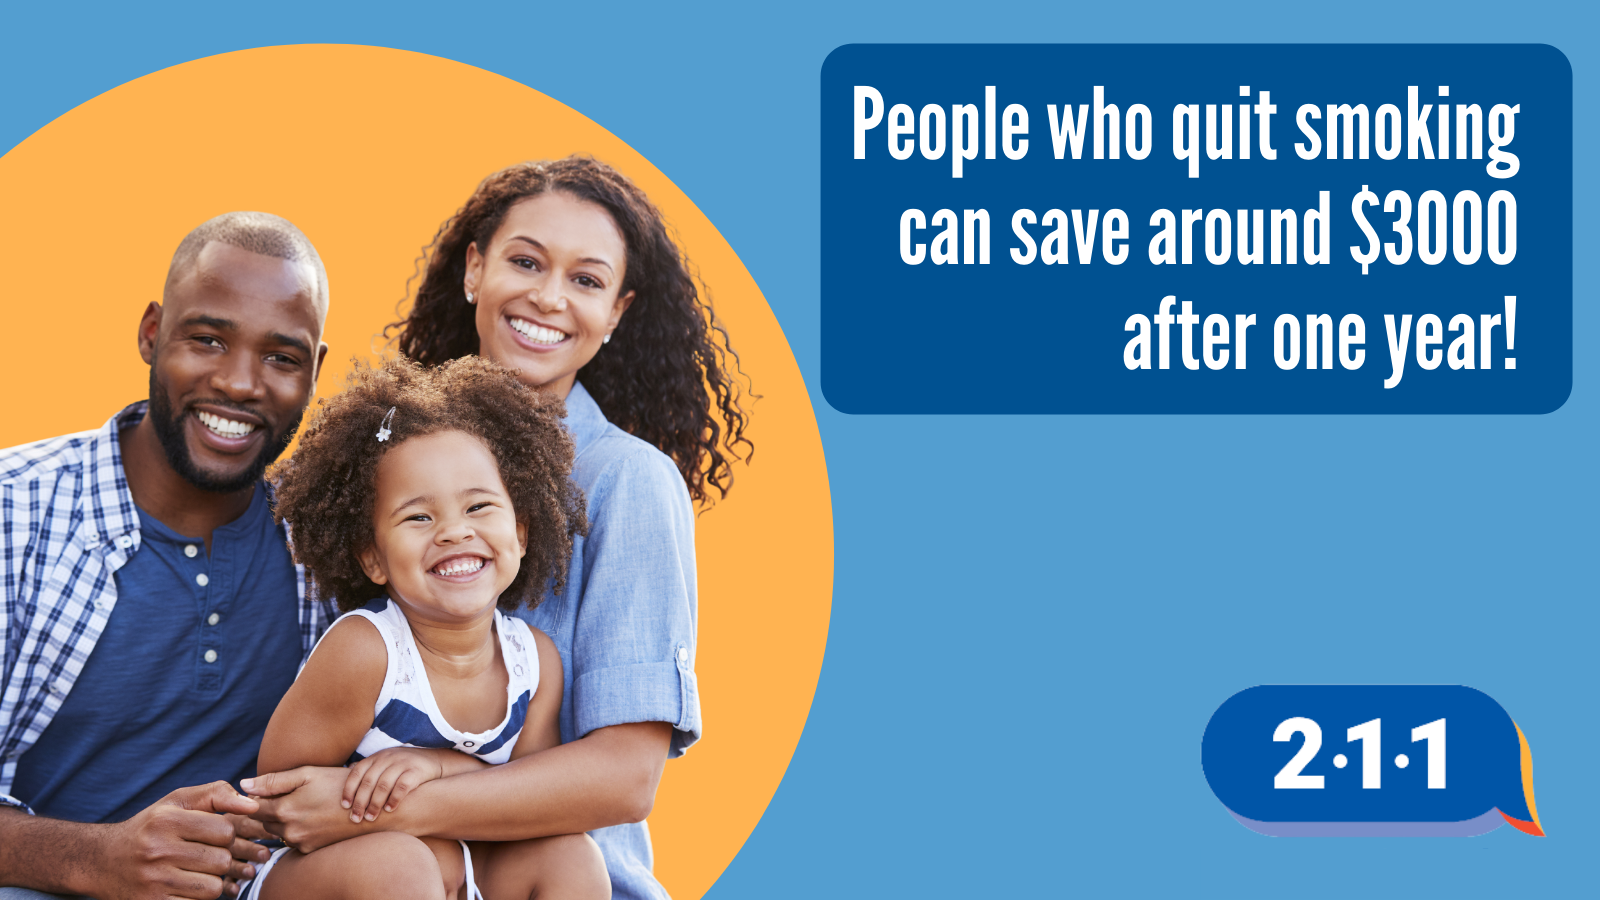 African American smiling family and text: People who quit smoking can save around $3000 after one year! 2-1-1